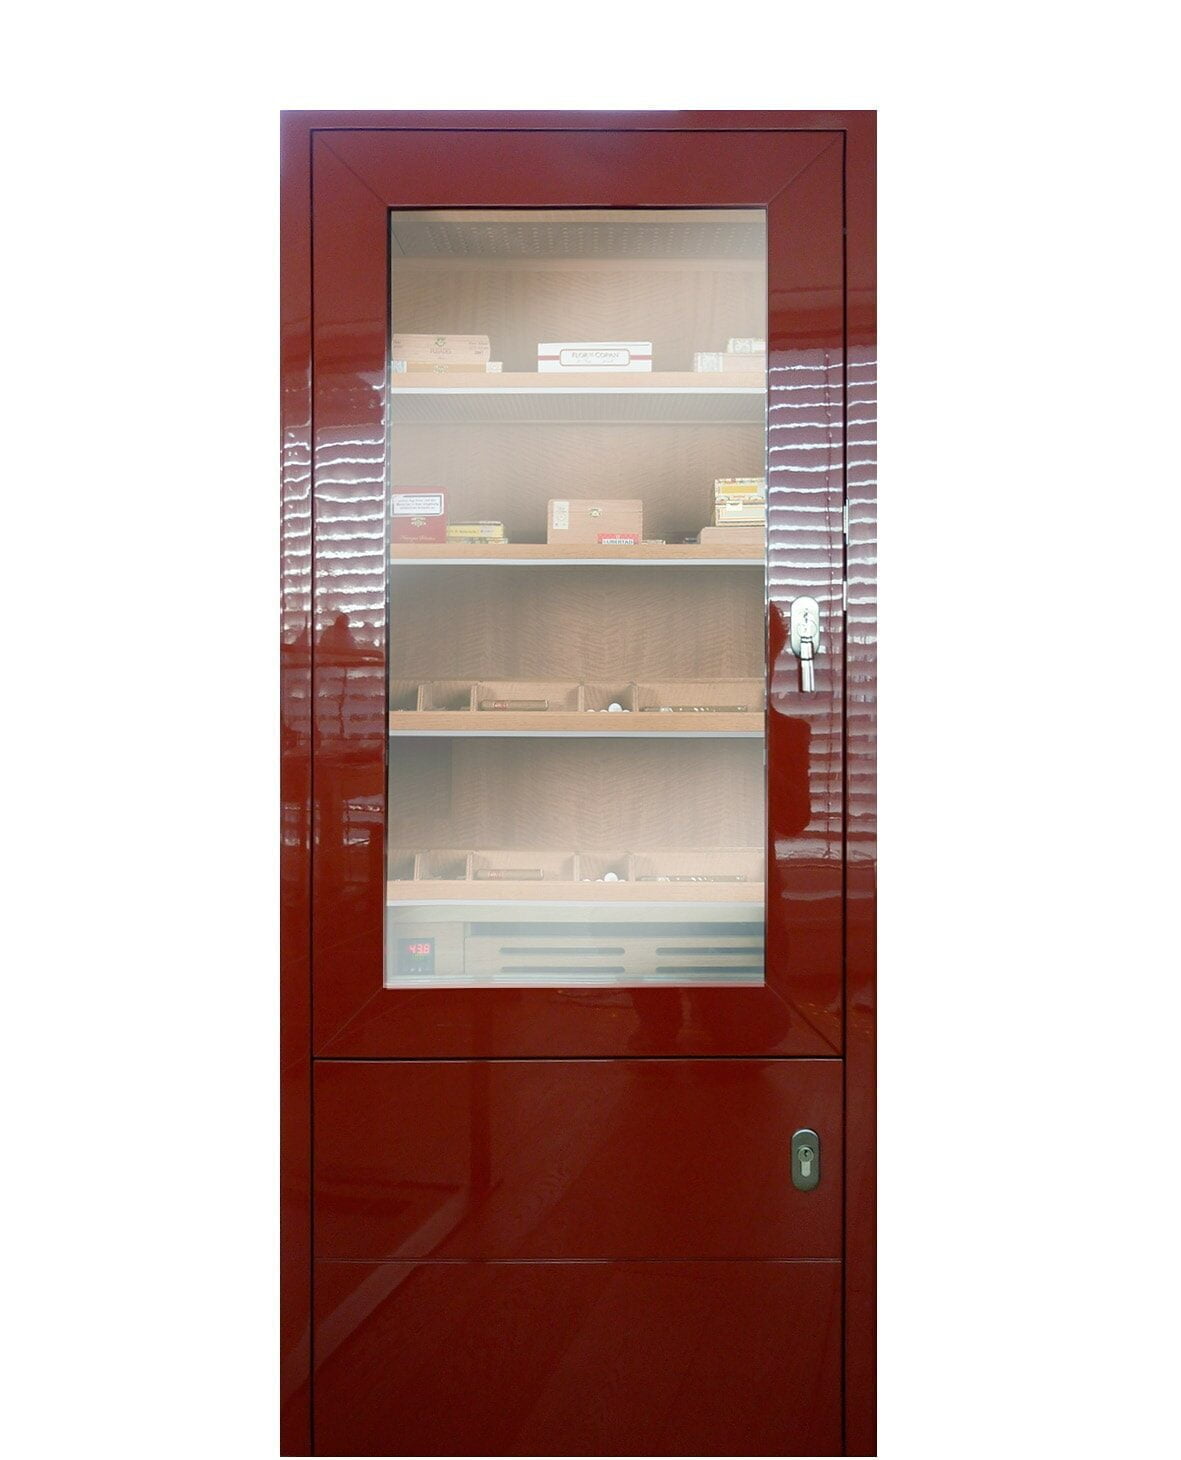 Cigar Cabinet in red with controlled humidity best cigar storage